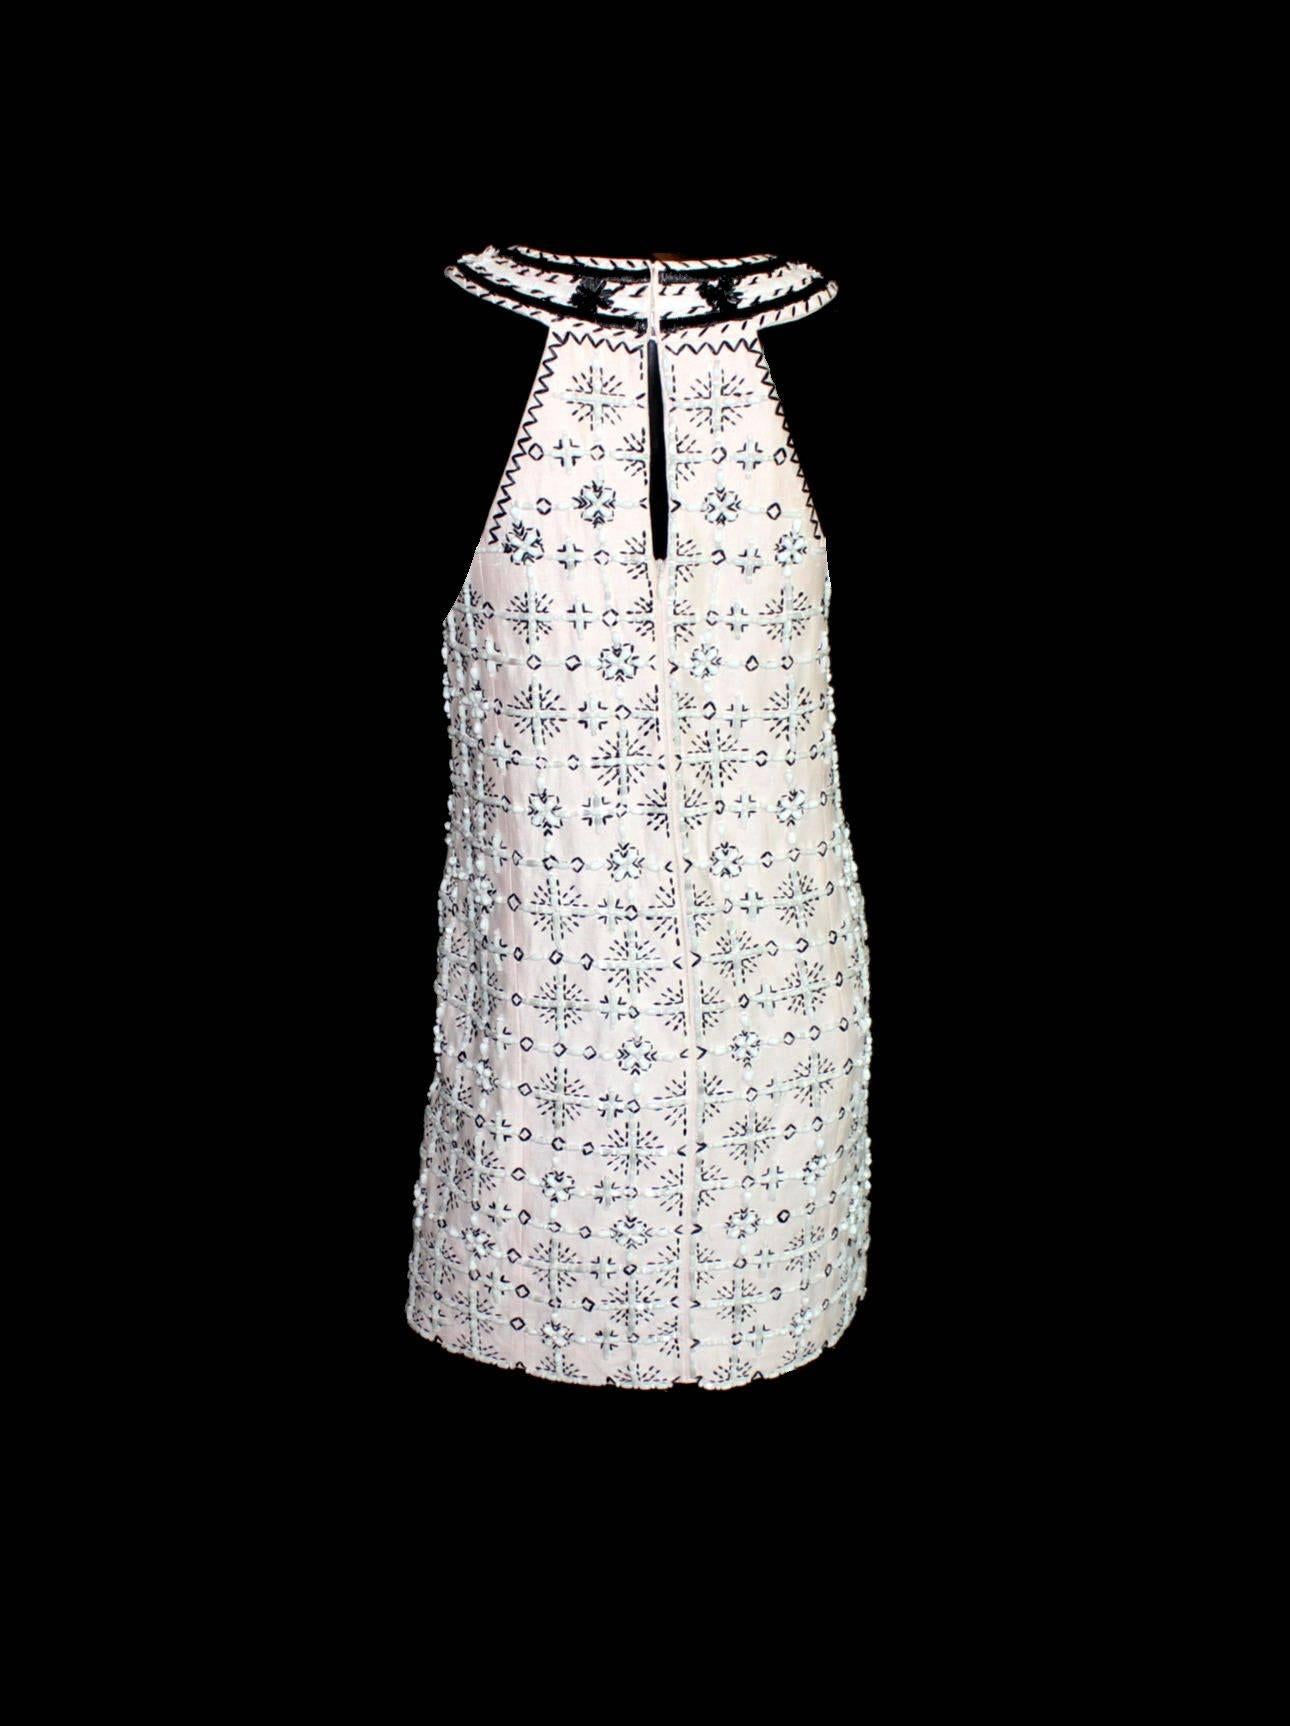 Stunning cocktail dress by Emilio Pucci
„Palm Royale“ style
Blush linen silk fabric with black and white trimming
Full beading
Beautiful embroidery and flower trimming
Fully lined
Closes with zip in back
Made in Italy
Size 40
New, unworn

Please